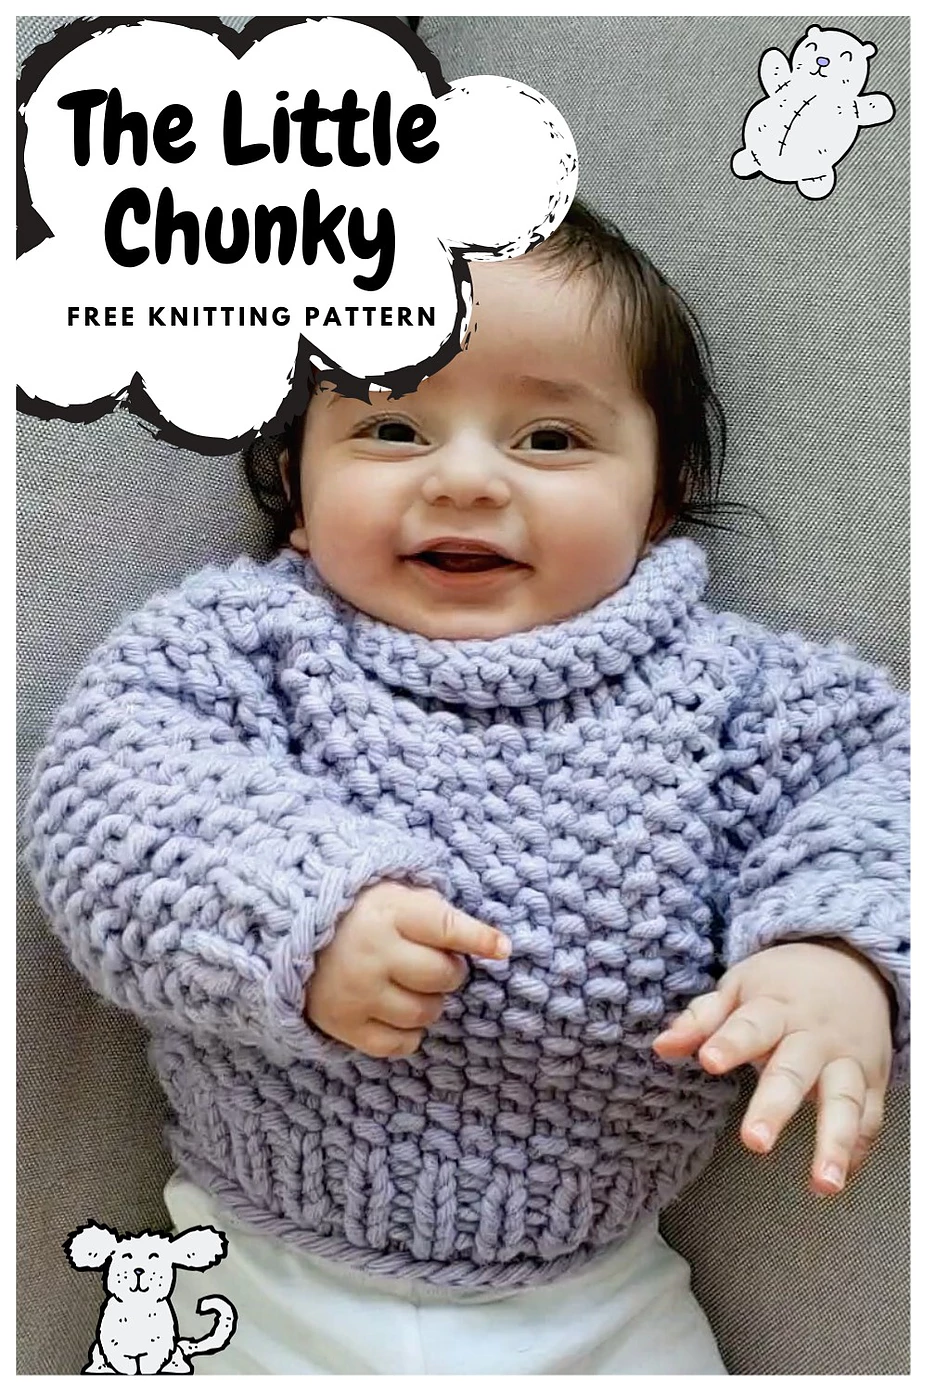 emulering Handel polet The Little Chunky - Free Knit Baby Sweater Pattern - The Snugglery